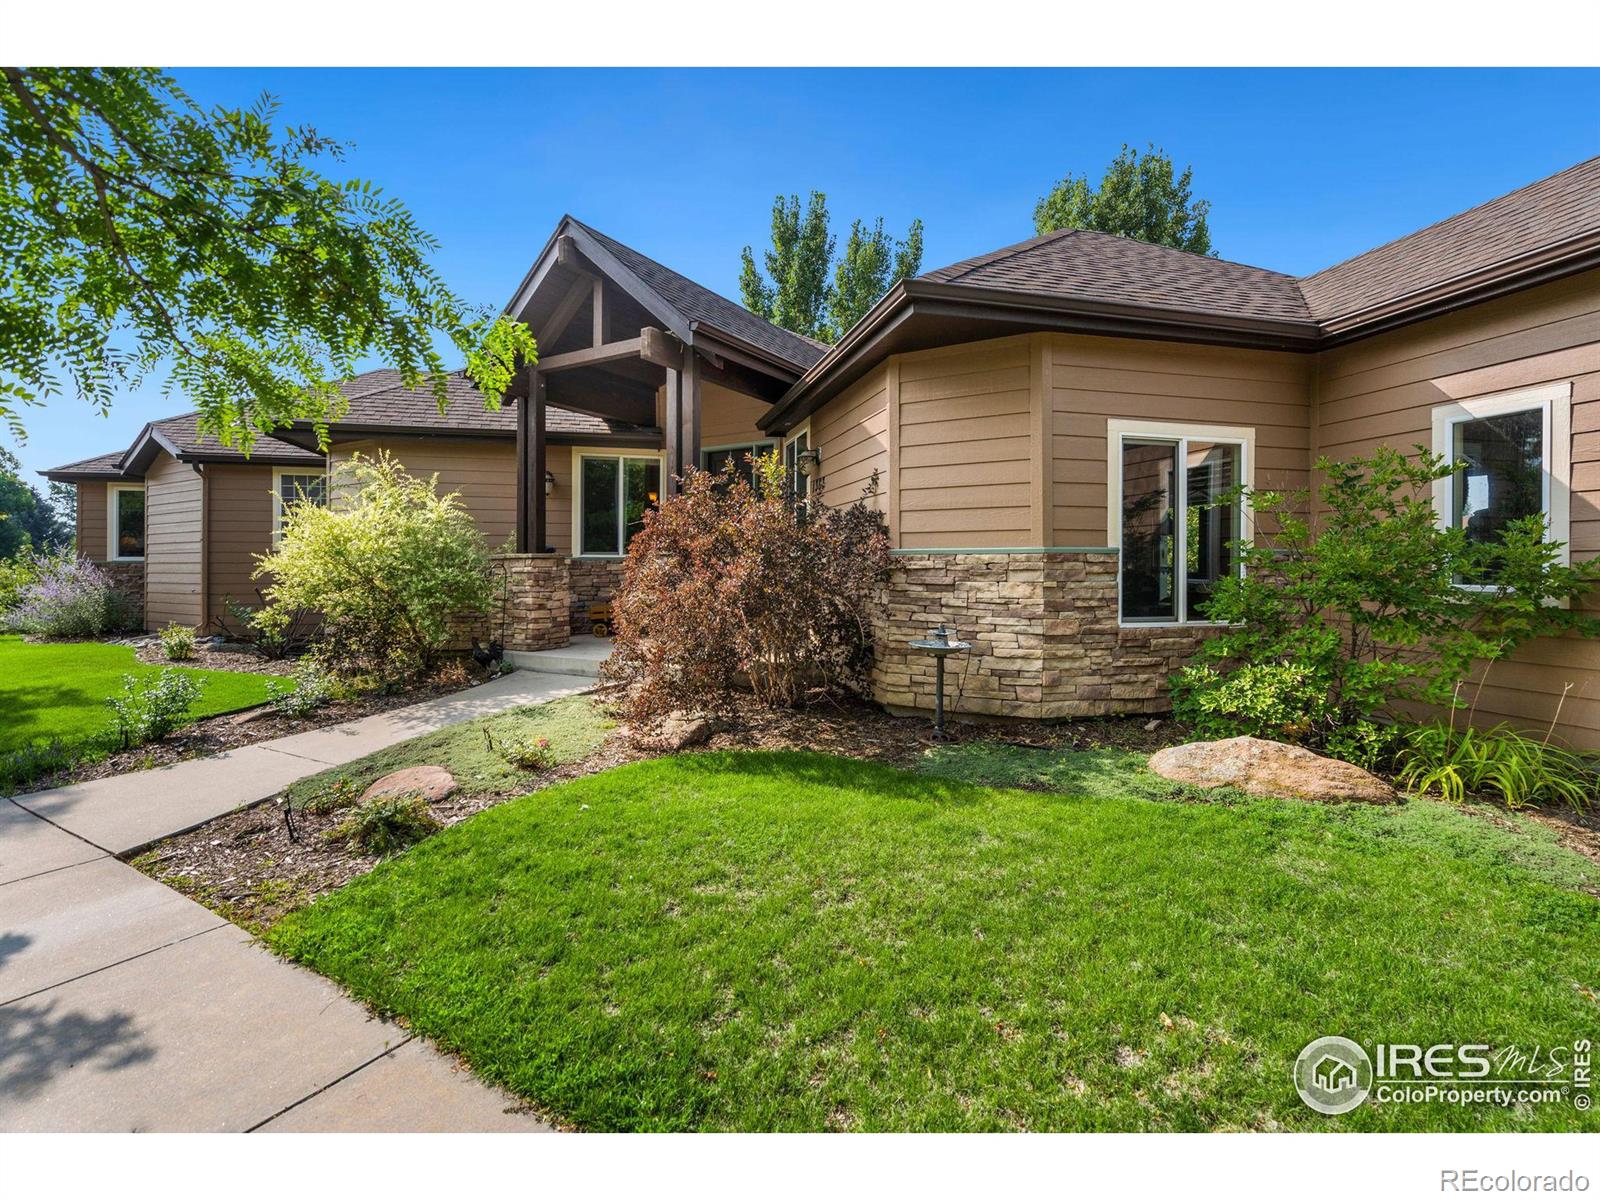 1303  town center drive, Fort Collins sold home. Closed on 2023-10-27 for $635,000.